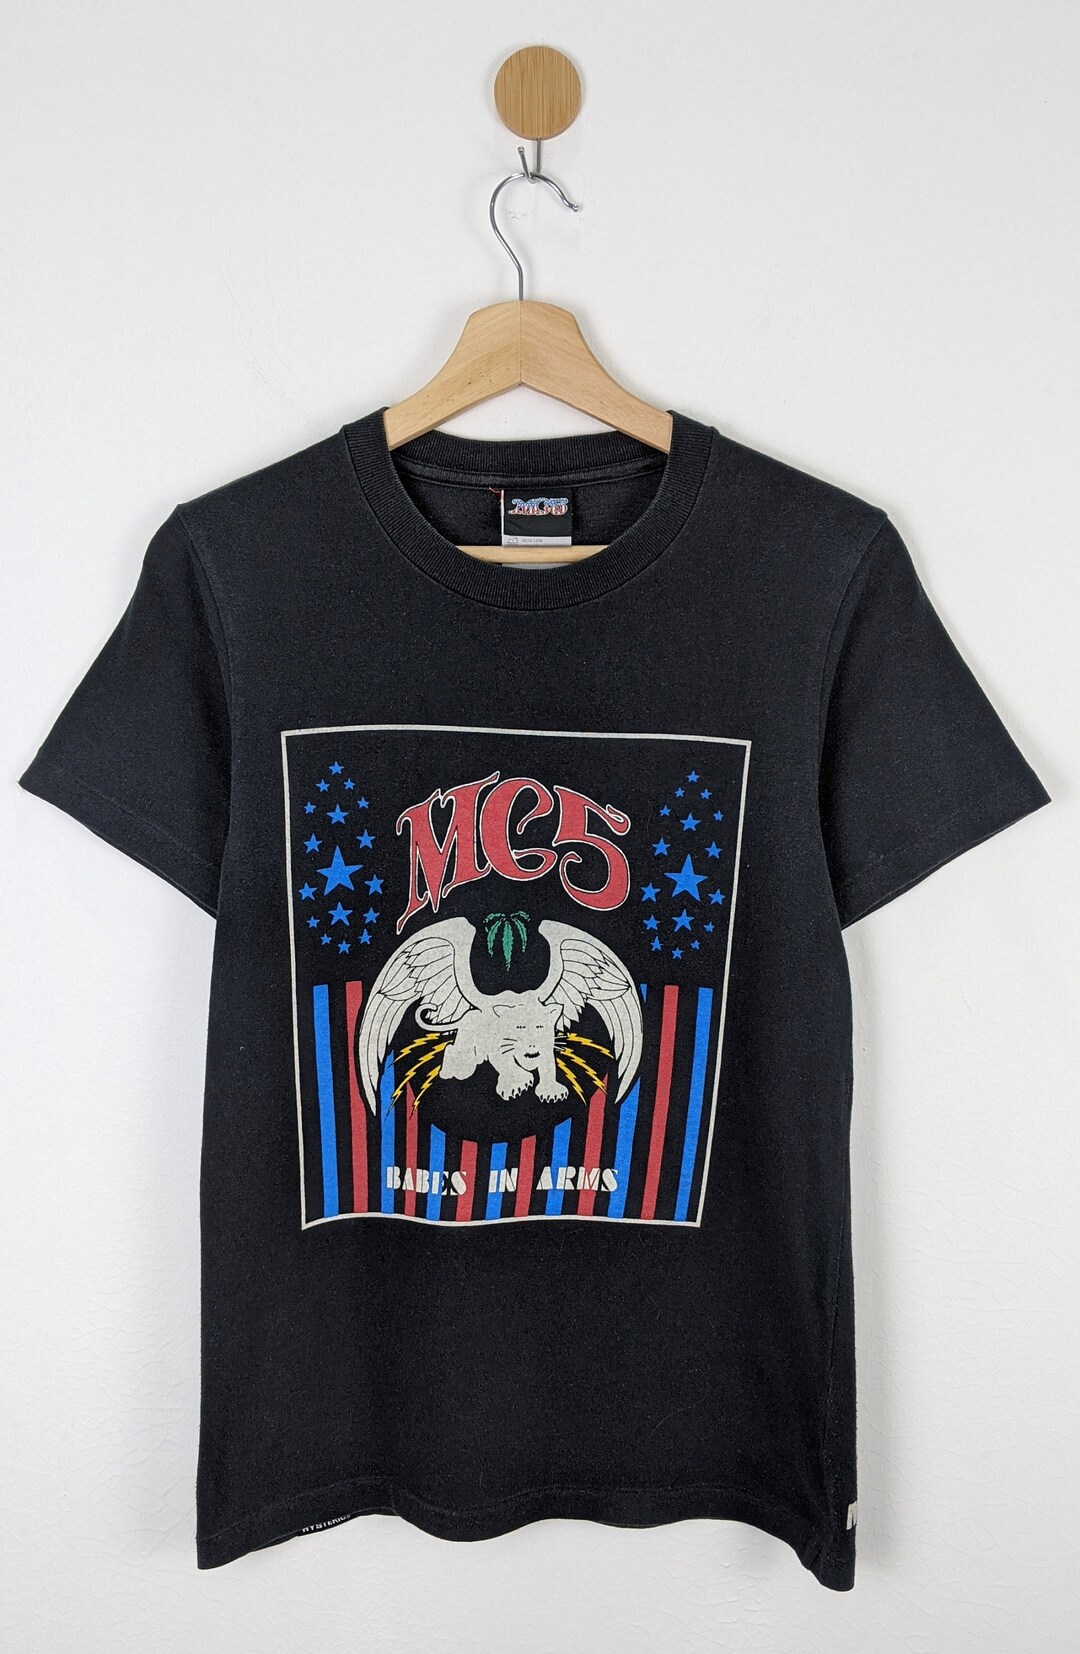 Hysteric Glamour X MC5 Babes in Arms Shirt Size: US S - Etsy